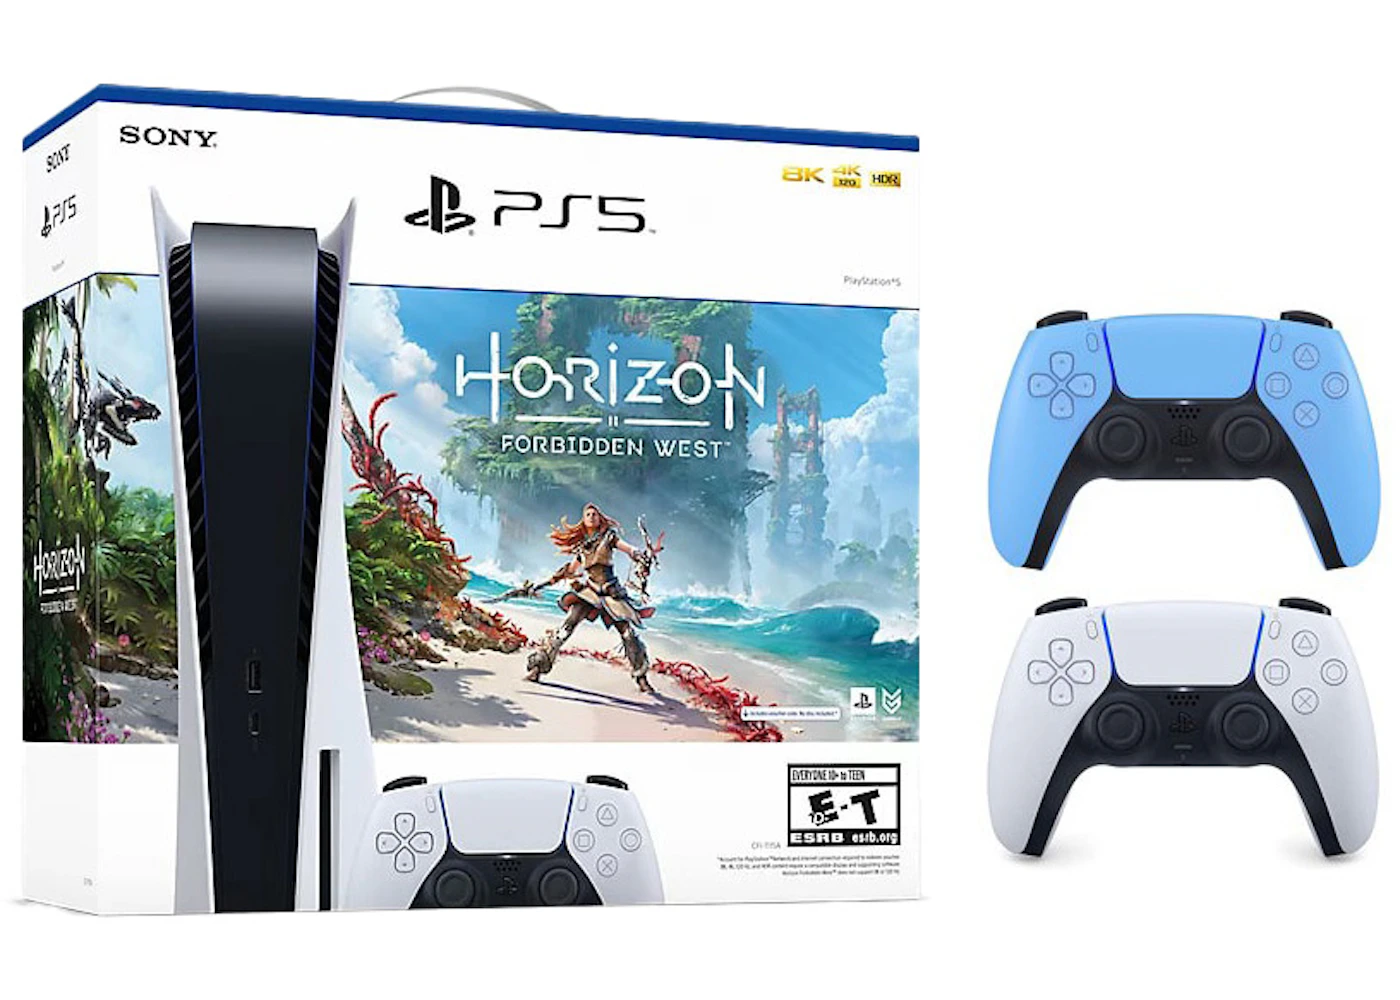 Sony Playstation 5 PS5 Horizon Forbidden West Blu-Ray Console with Extra  DualSense Wireless Controller Bundle (US Plug)  1000032115/1000032000-3006394 Starlight Blue - GB